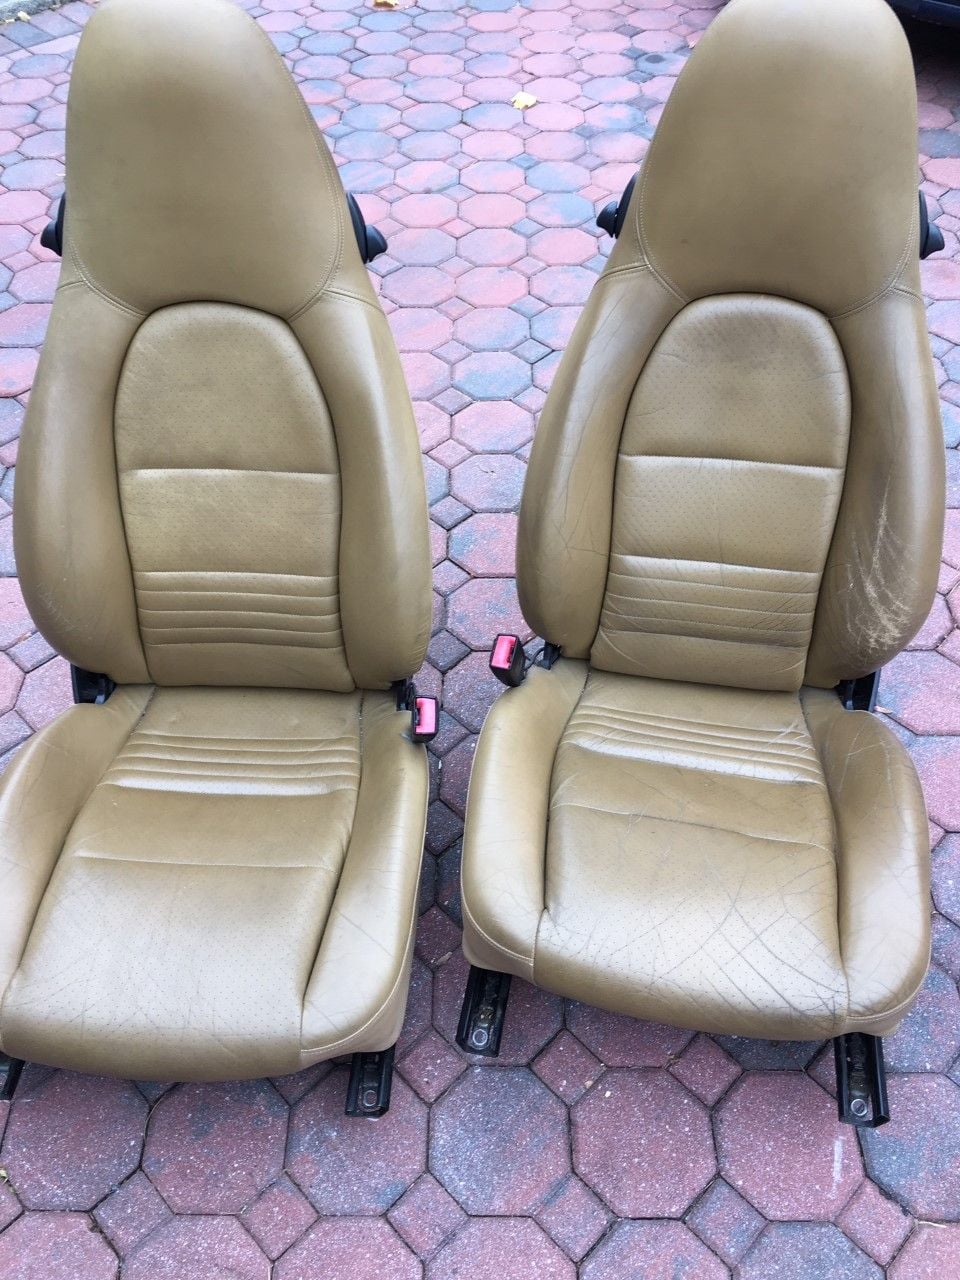 2000 Porsche 911 - Driver and Passenger Seats - Interior/Upholstery - $500 - Plainview, NY 11803, United States